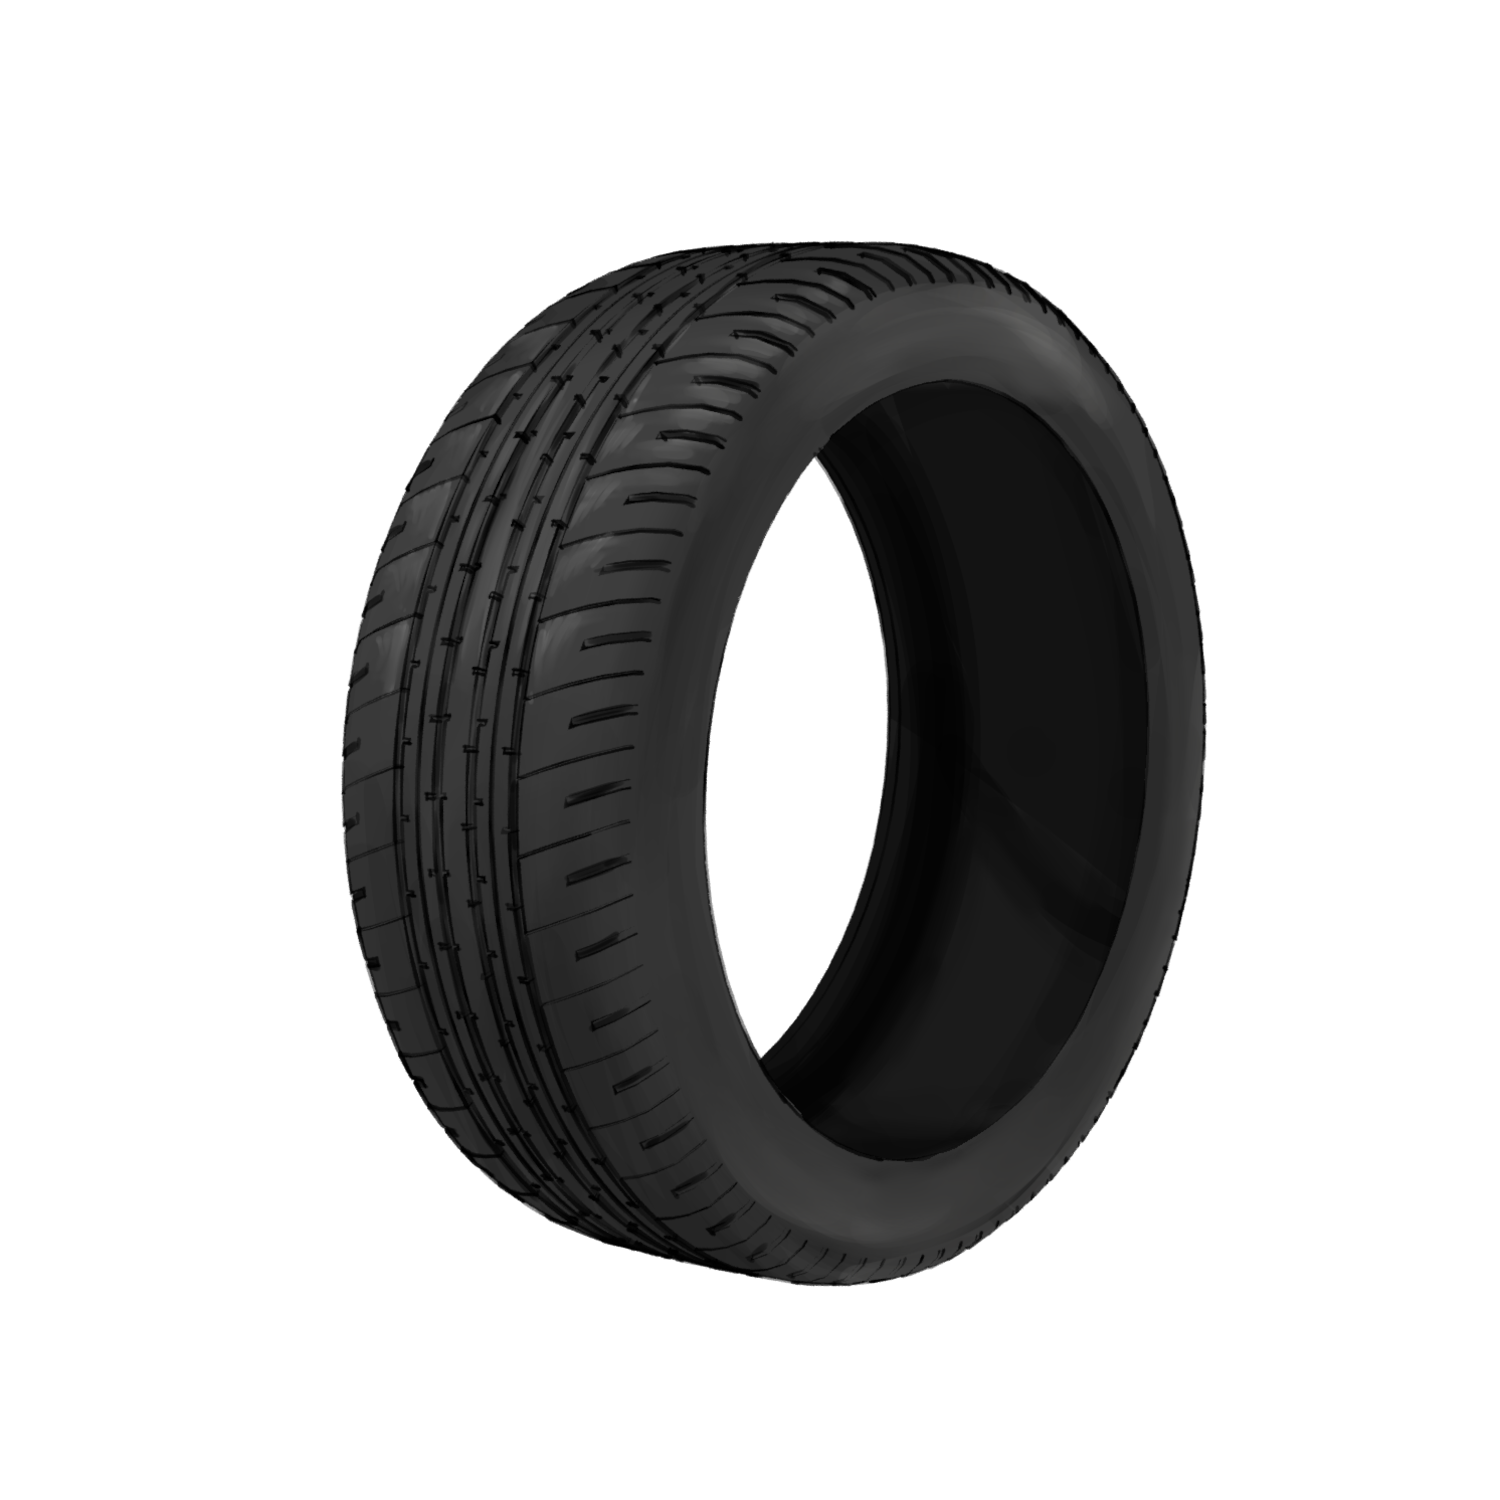  Product image 1 of the product “City Evolution Tyre ”